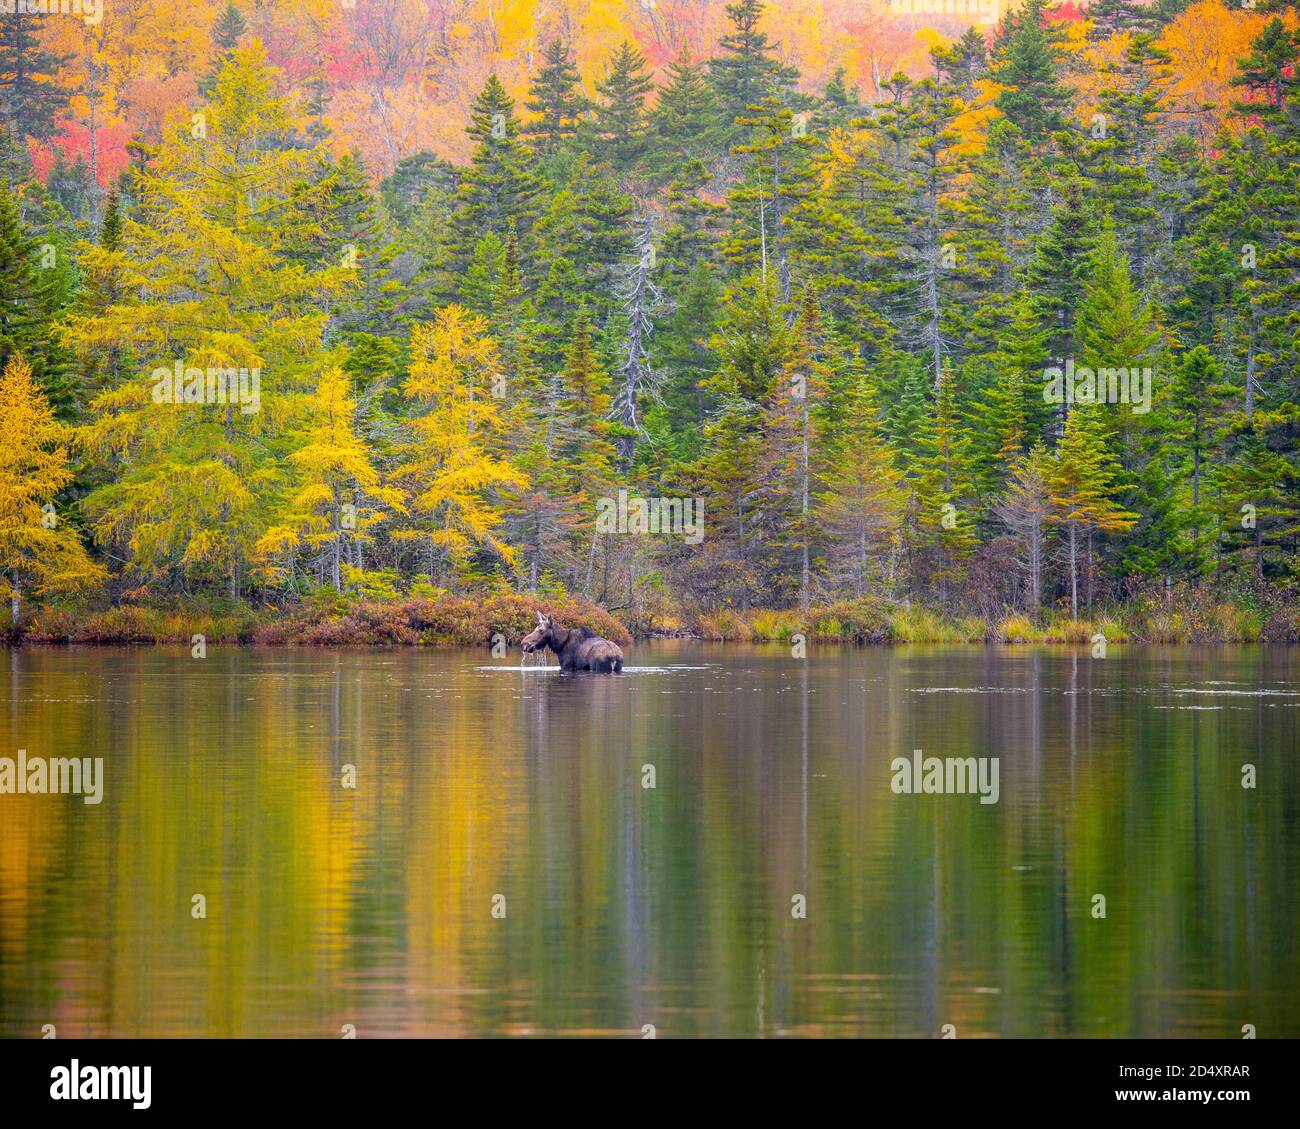 Moose wading in Sandy Pond, Baxter State Park Maine during fogy fall day. Stock Photo